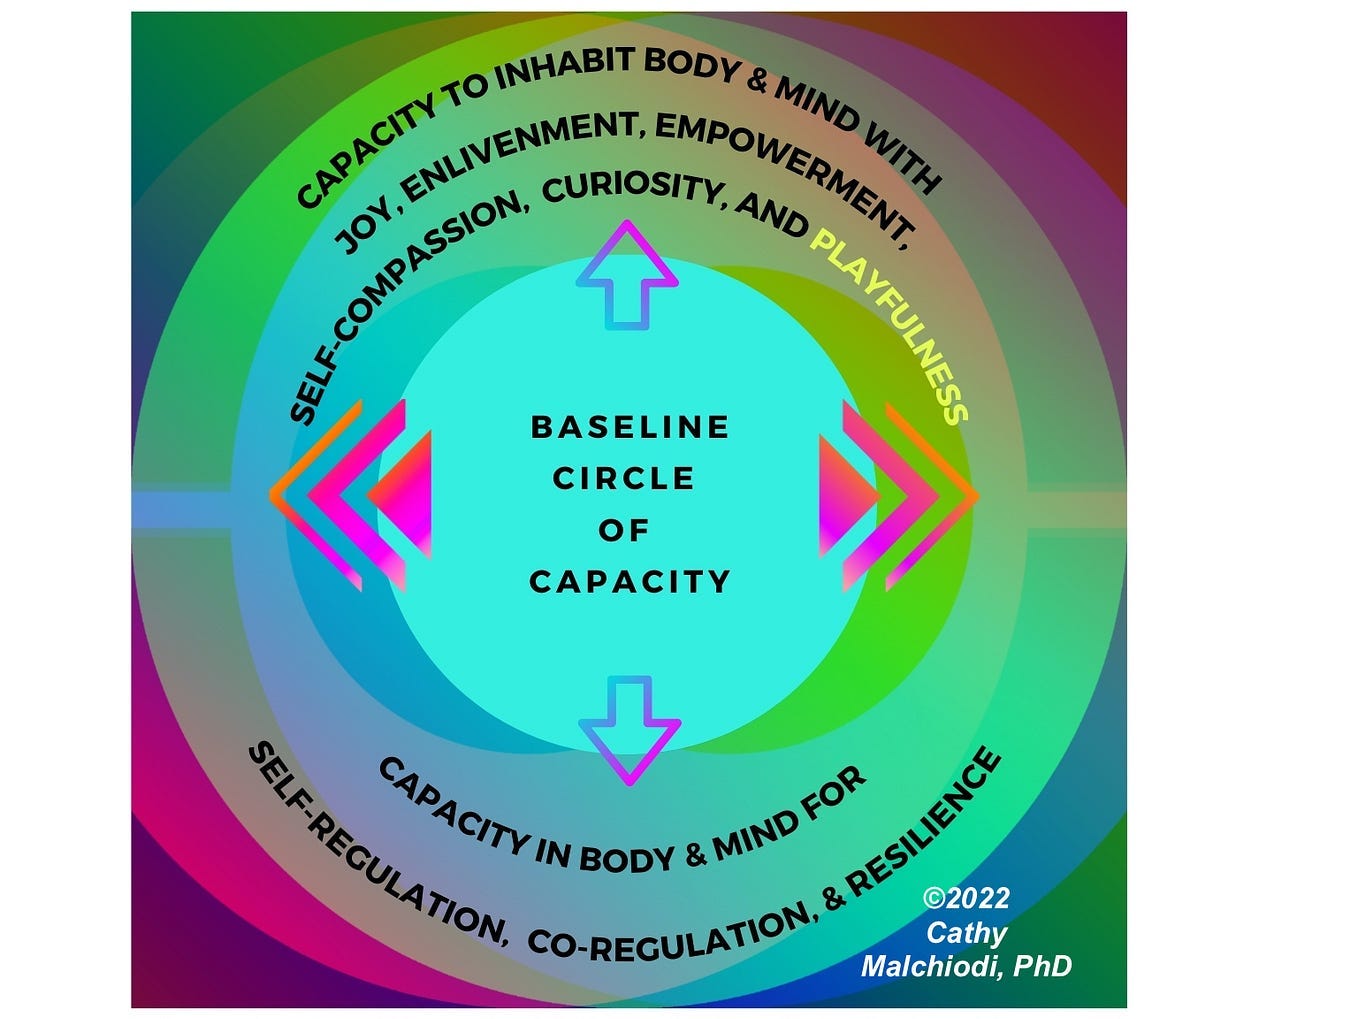 Concentric circles with the center representing the baseline of capacity with the outer circles representing expanding capacities 